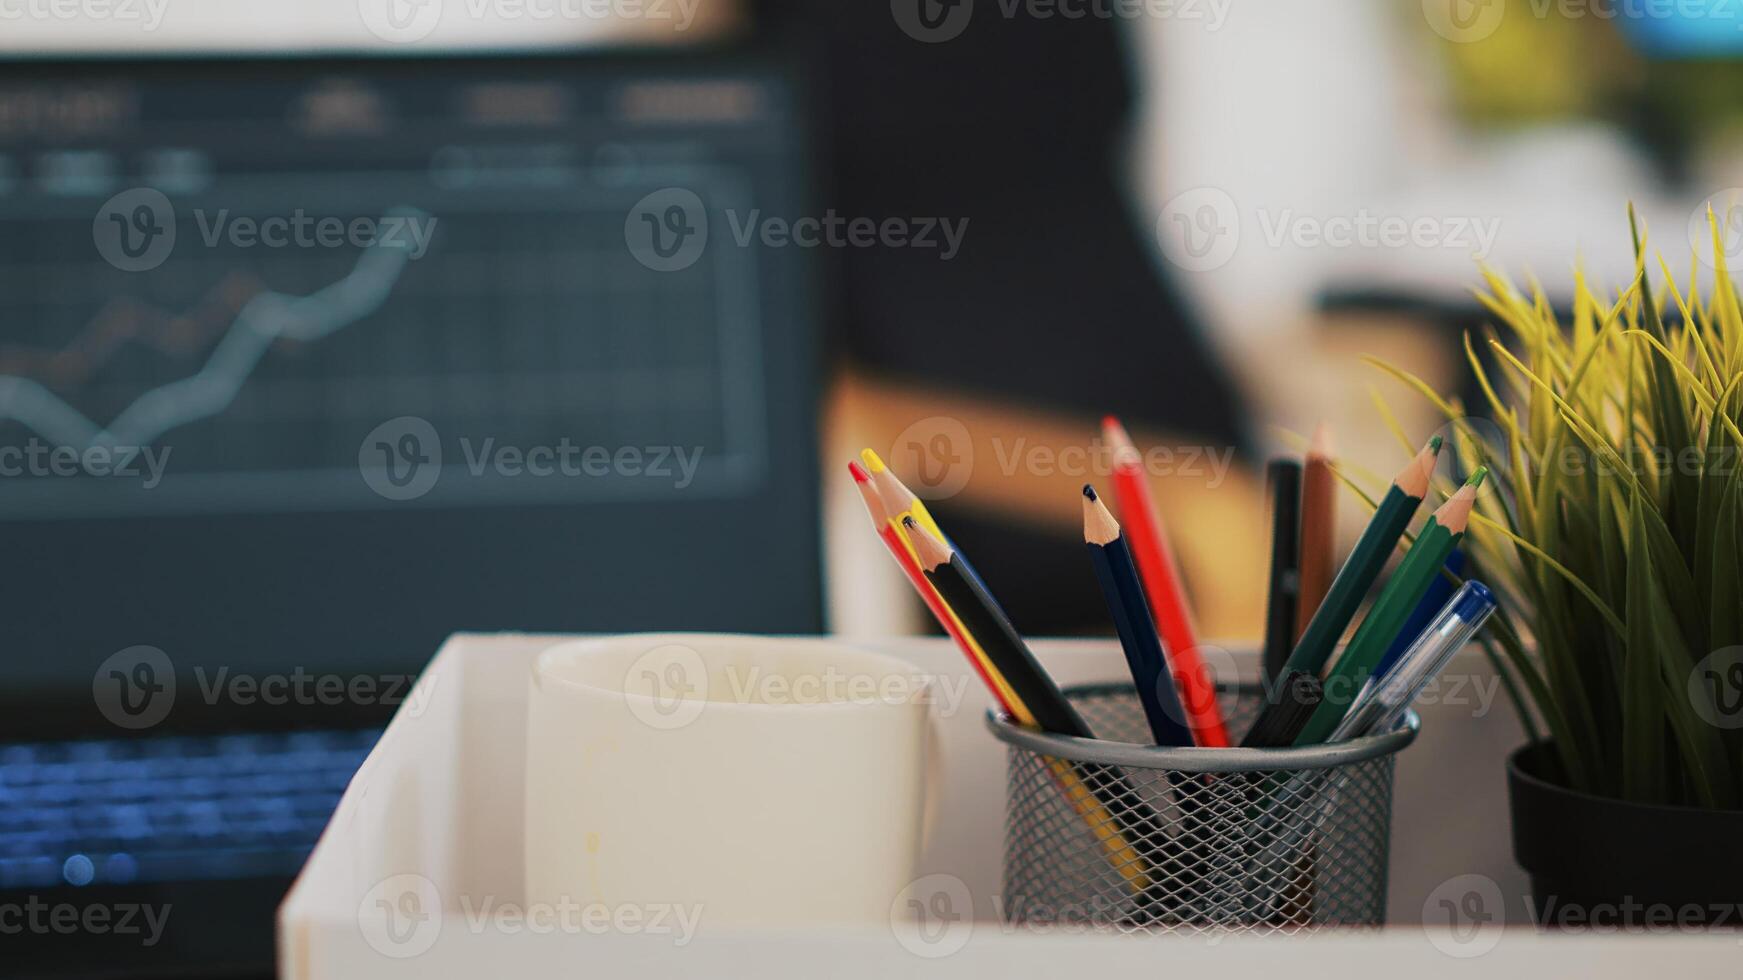 Focus on desk belongings in modern office with notebook in blurry background showing business diagram and figures, close up. Pencil holder, mini house plant, empty coffee mug and graphs on laptop photo